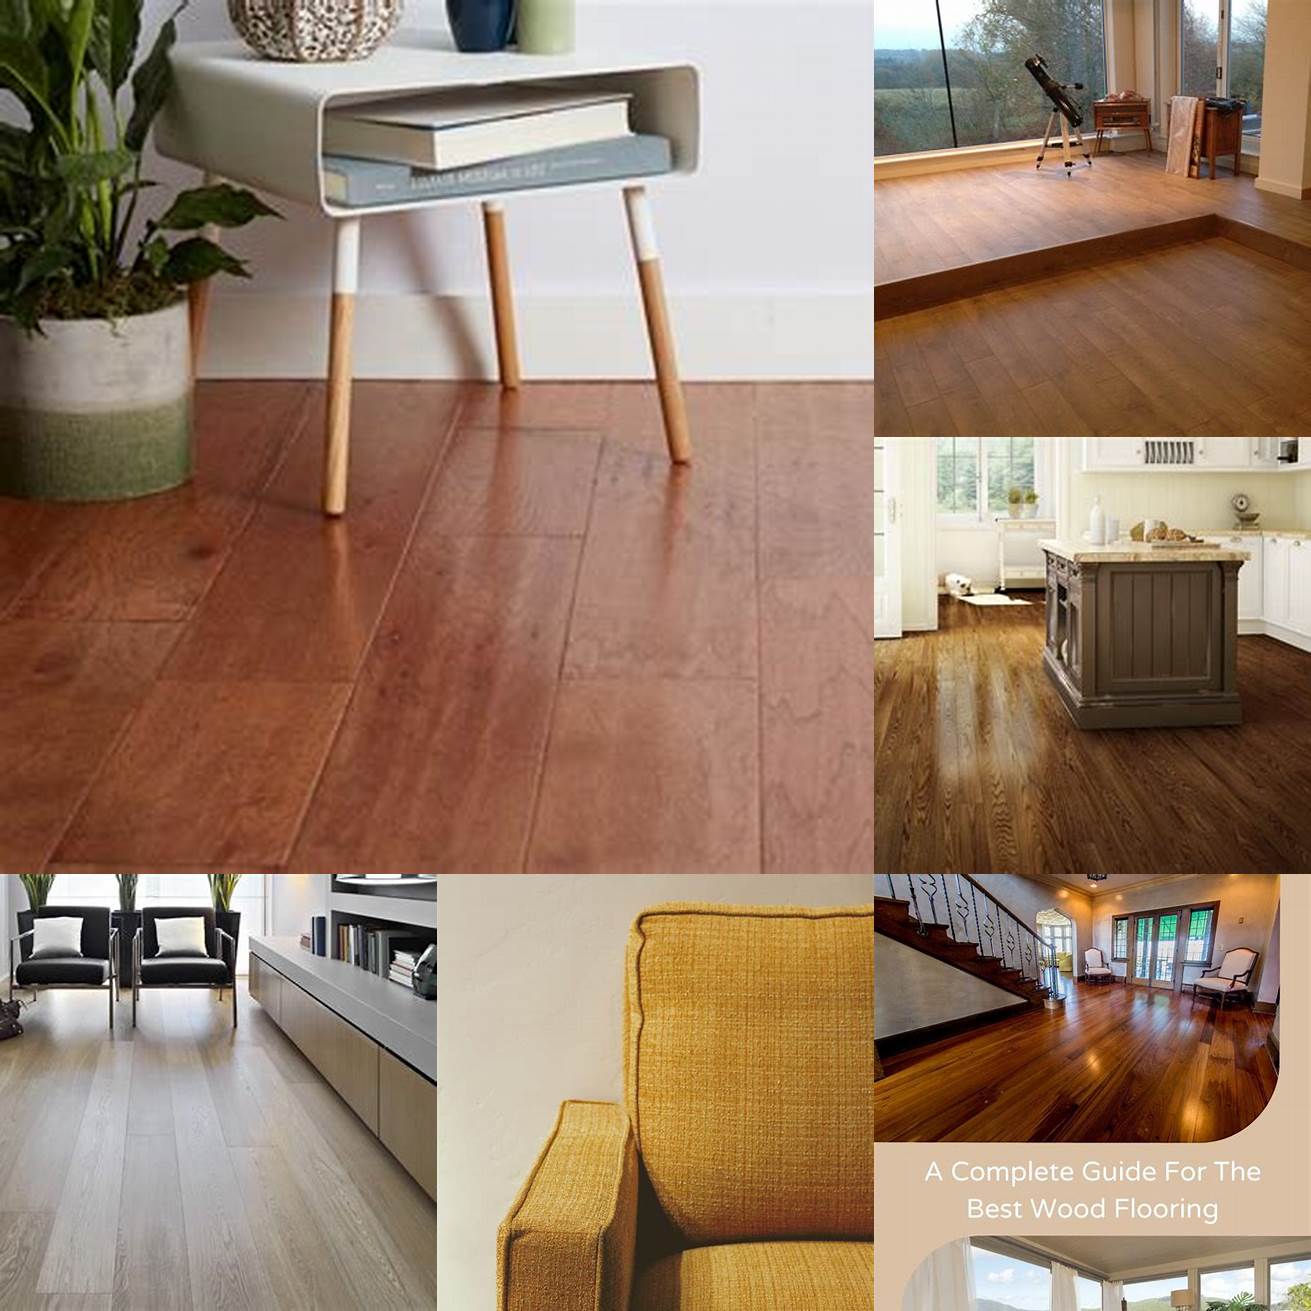 Hardwoods and textiles are durable and long-lasting